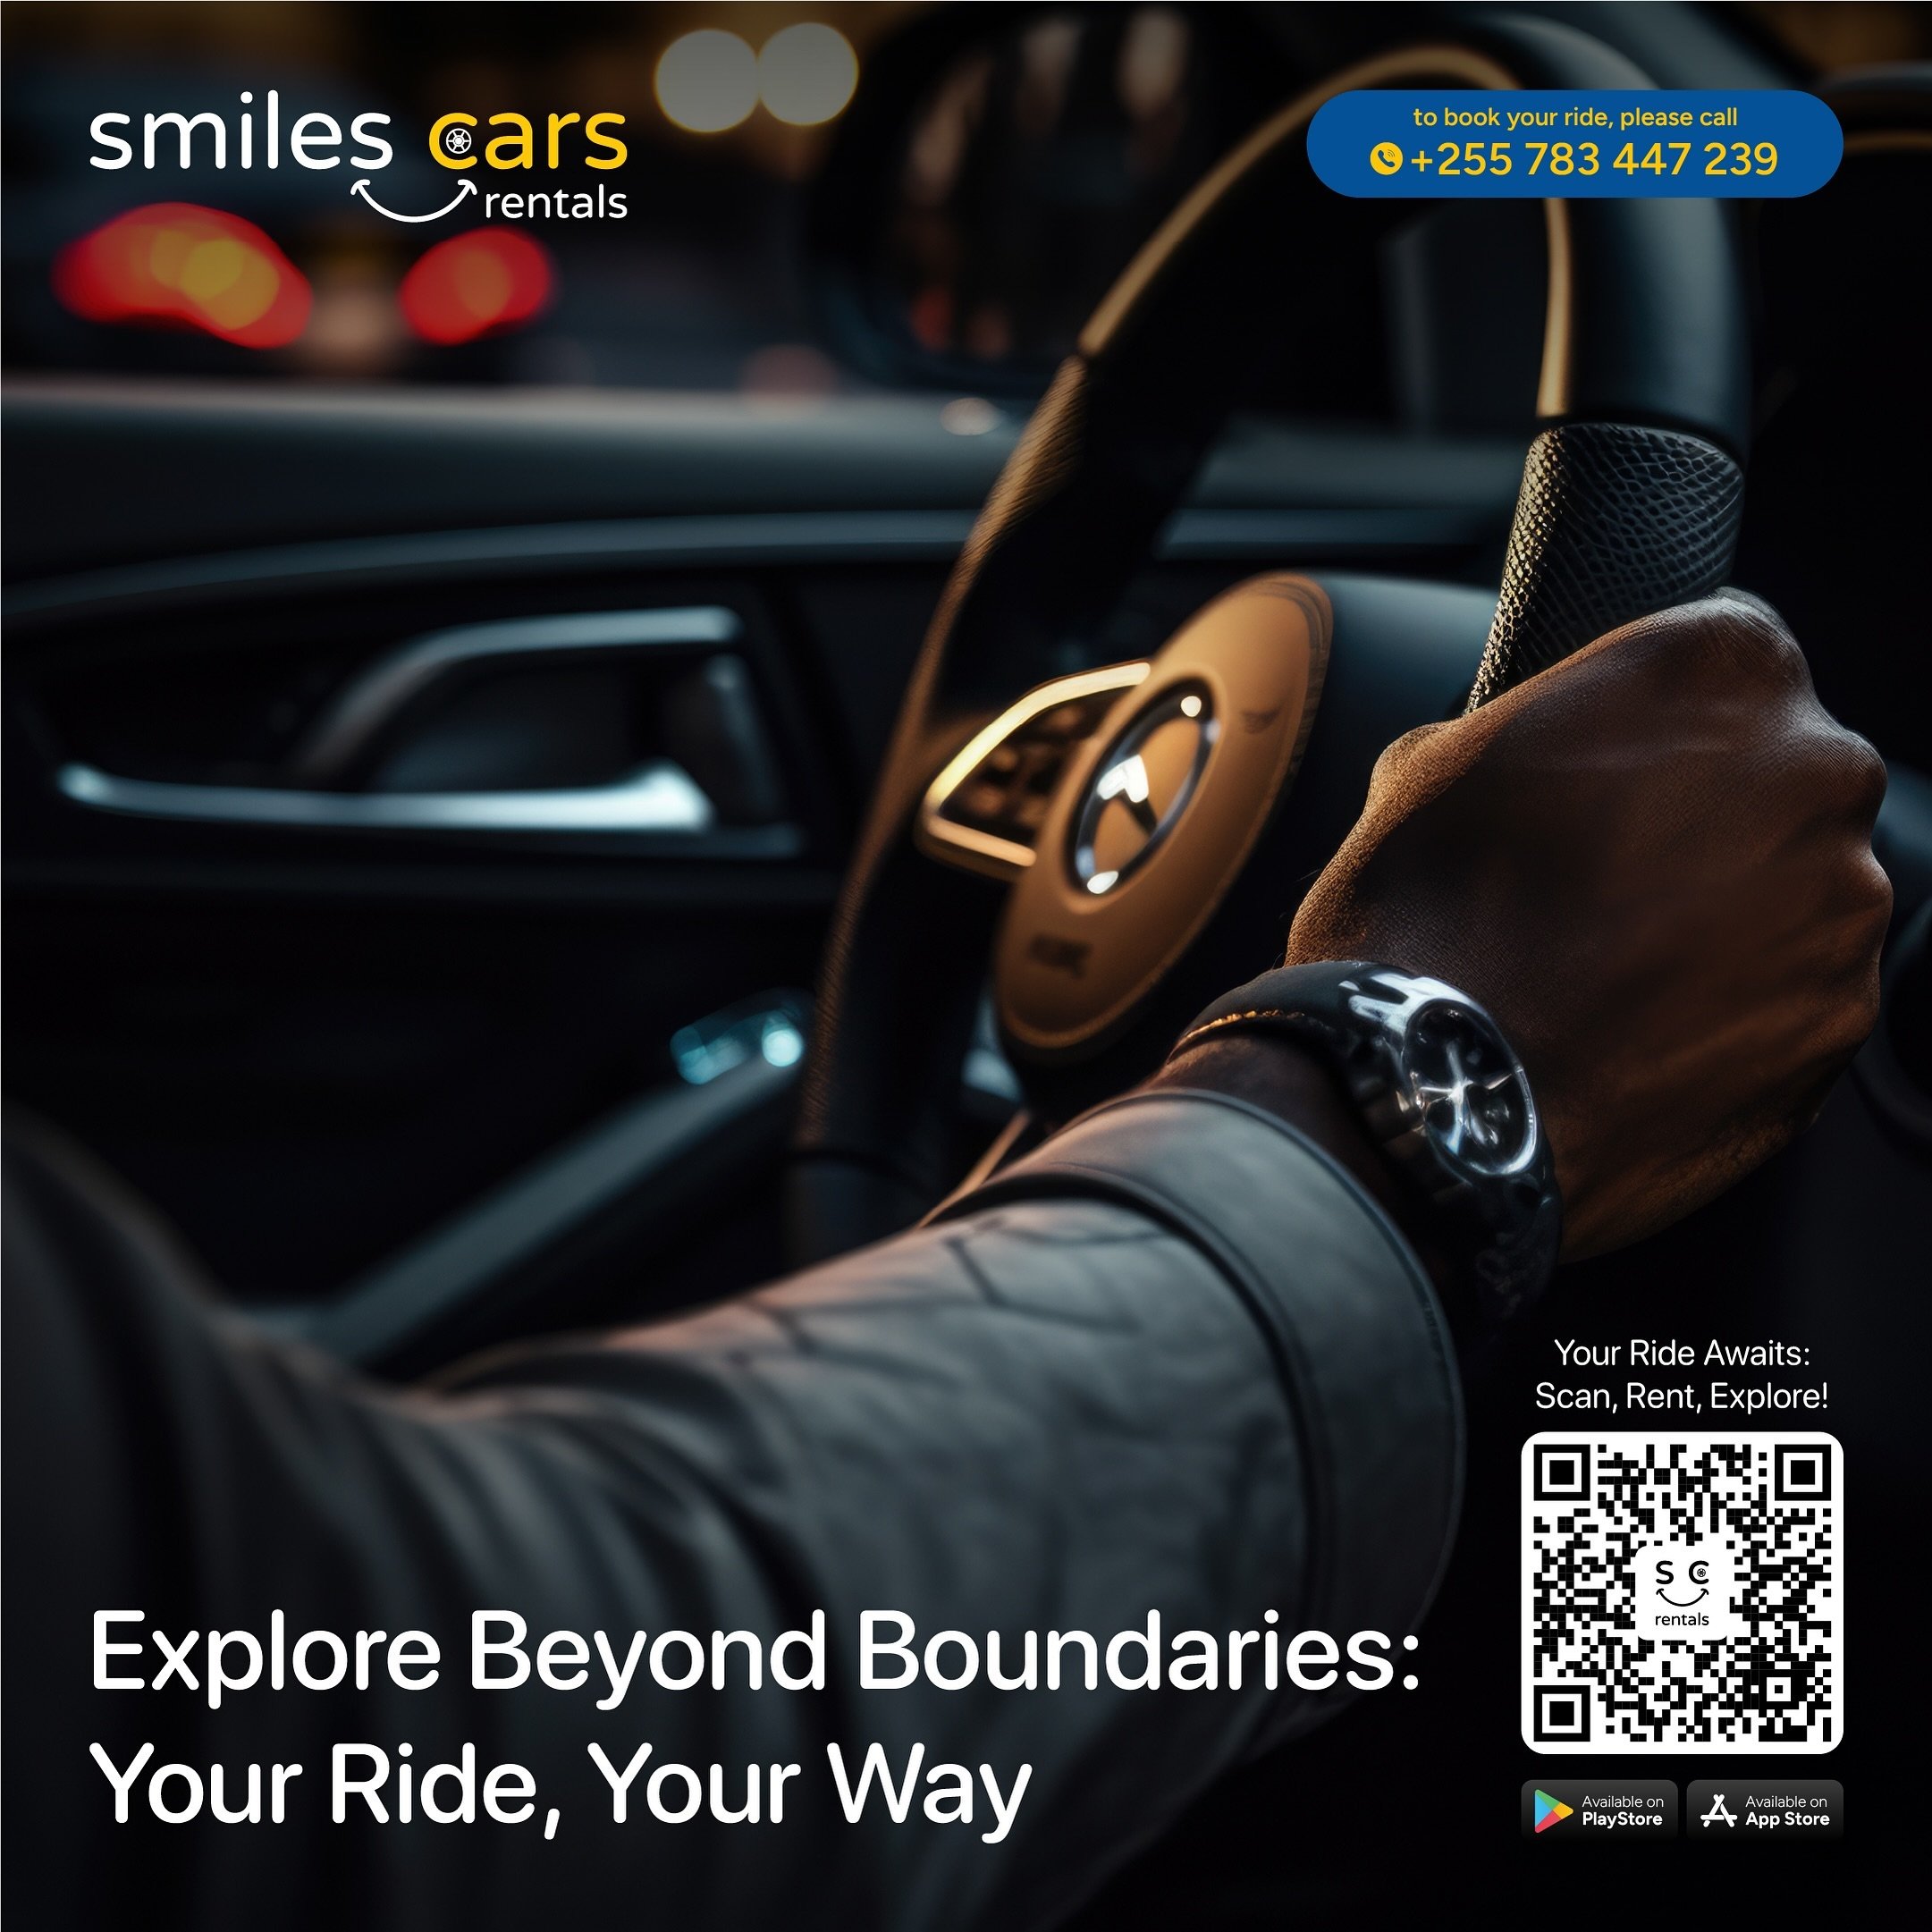 Every moment behind the wheel is a chance to discover something new. Let your curiosity drive you forward as you explore uncharted territories. Scan the QR code, book your ride, and pave your own path. The road is yours to conquer. 🌟🚗 
#ExploreBeyo